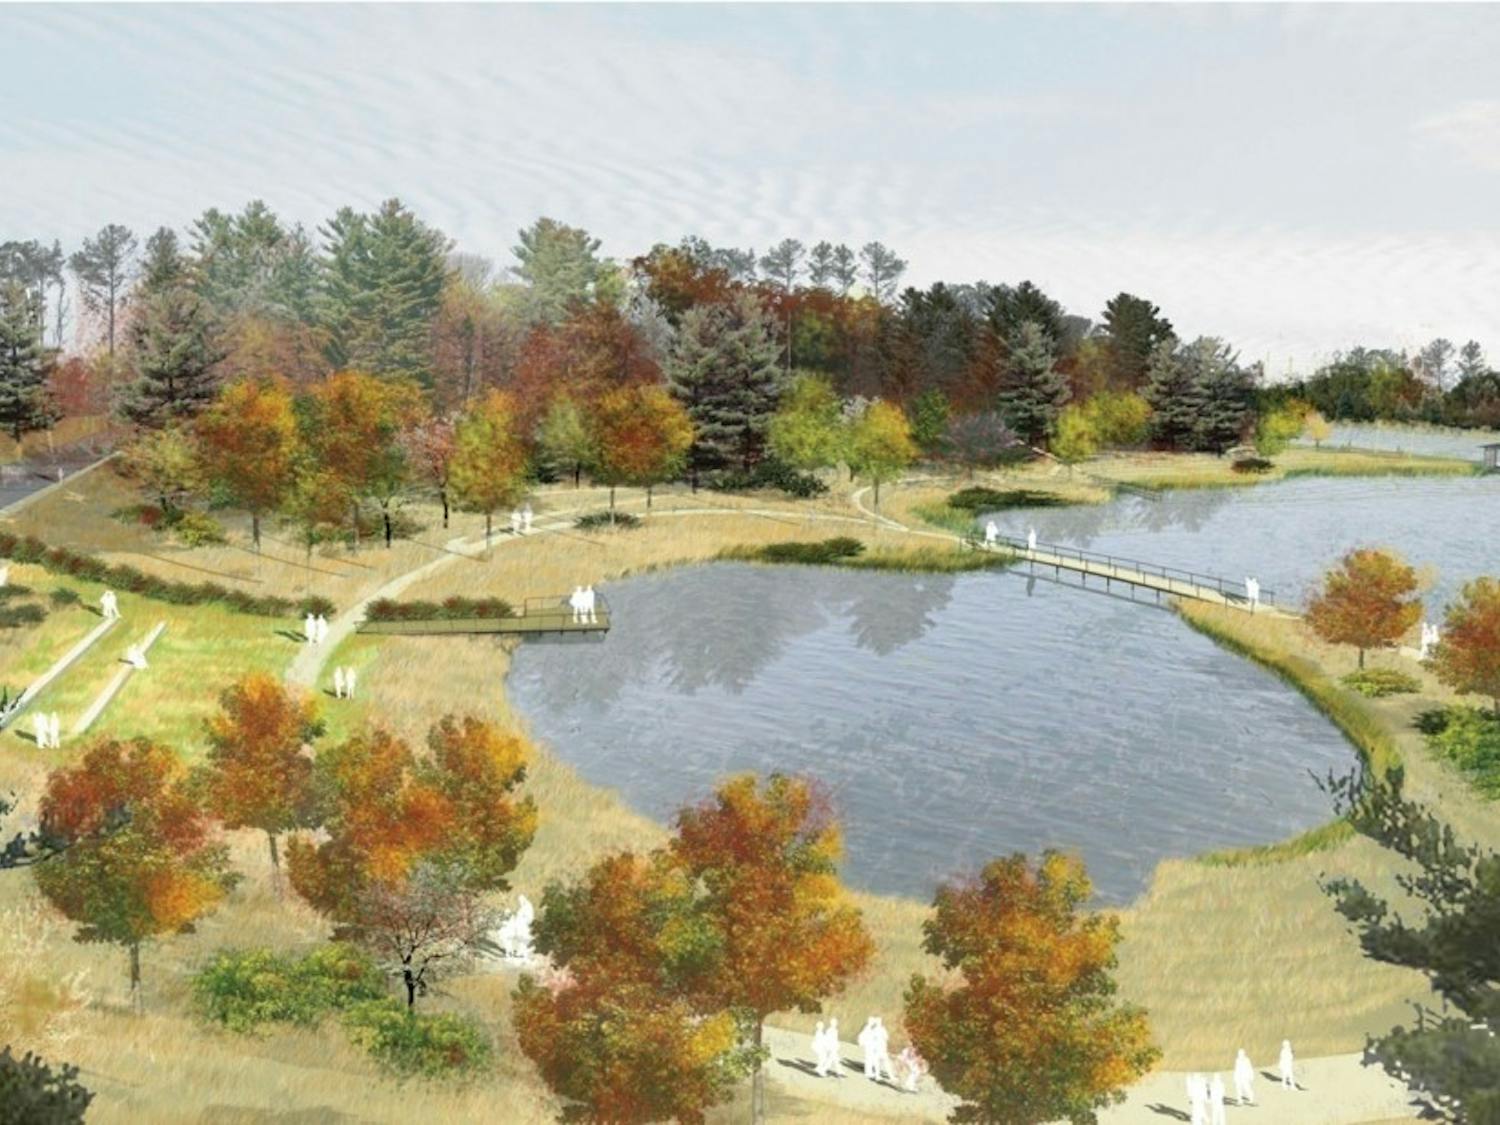 The pond is expected to be completed Summer 2014.